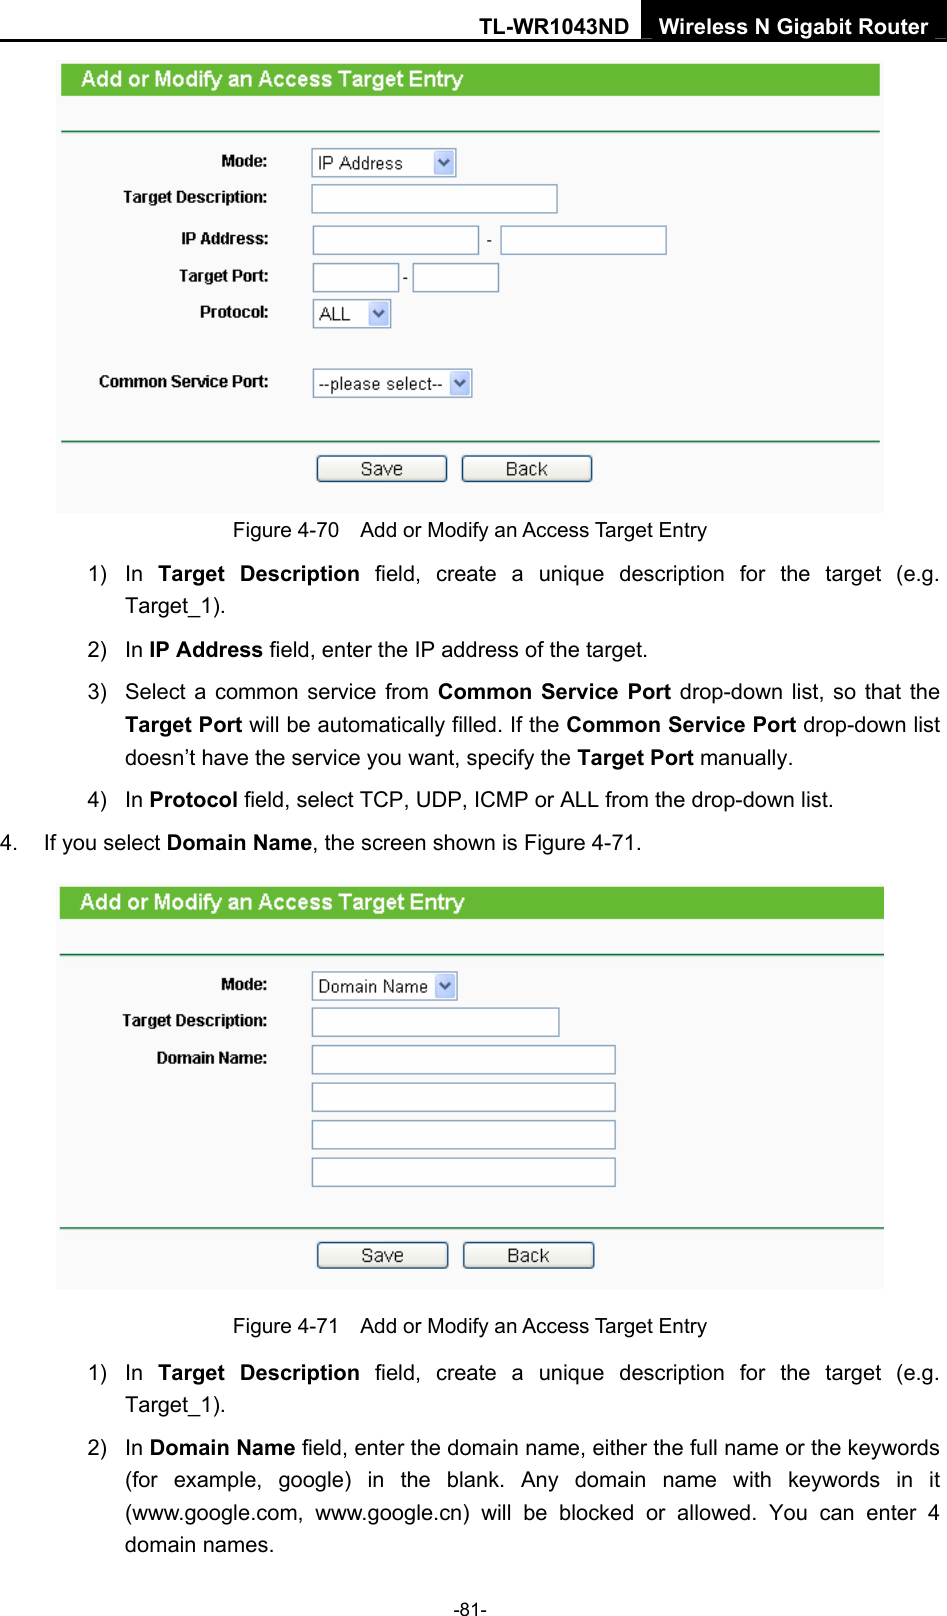 TL-WR1043ND Wireless N Gigabit Router  -81-  Figure 4-70    Add or Modify an Access Target Entry 1) In Target Description field, create a unique description for the target (e.g. Target_1). 2) In IP Address field, enter the IP address of the target. 3)  Select a common service from Common Service Port drop-down list, so that the Target Port will be automatically filled. If the Common Service Port drop-down list doesn’t have the service you want, specify the Target Port manually. 4) In Protocol field, select TCP, UDP, ICMP or ALL from the drop-down list.  4.  If you select Domain Name, the screen shown is Figure 4-71.  Figure 4-71    Add or Modify an Access Target Entry 1) In Target Description field, create a unique description for the target (e.g. Target_1). 2) In Domain Name field, enter the domain name, either the full name or the keywords (for example, google) in the blank. Any domain name with keywords in it (www.google.com,  www.google.cn) will be blocked or allowed. You can enter 4 domain names. 